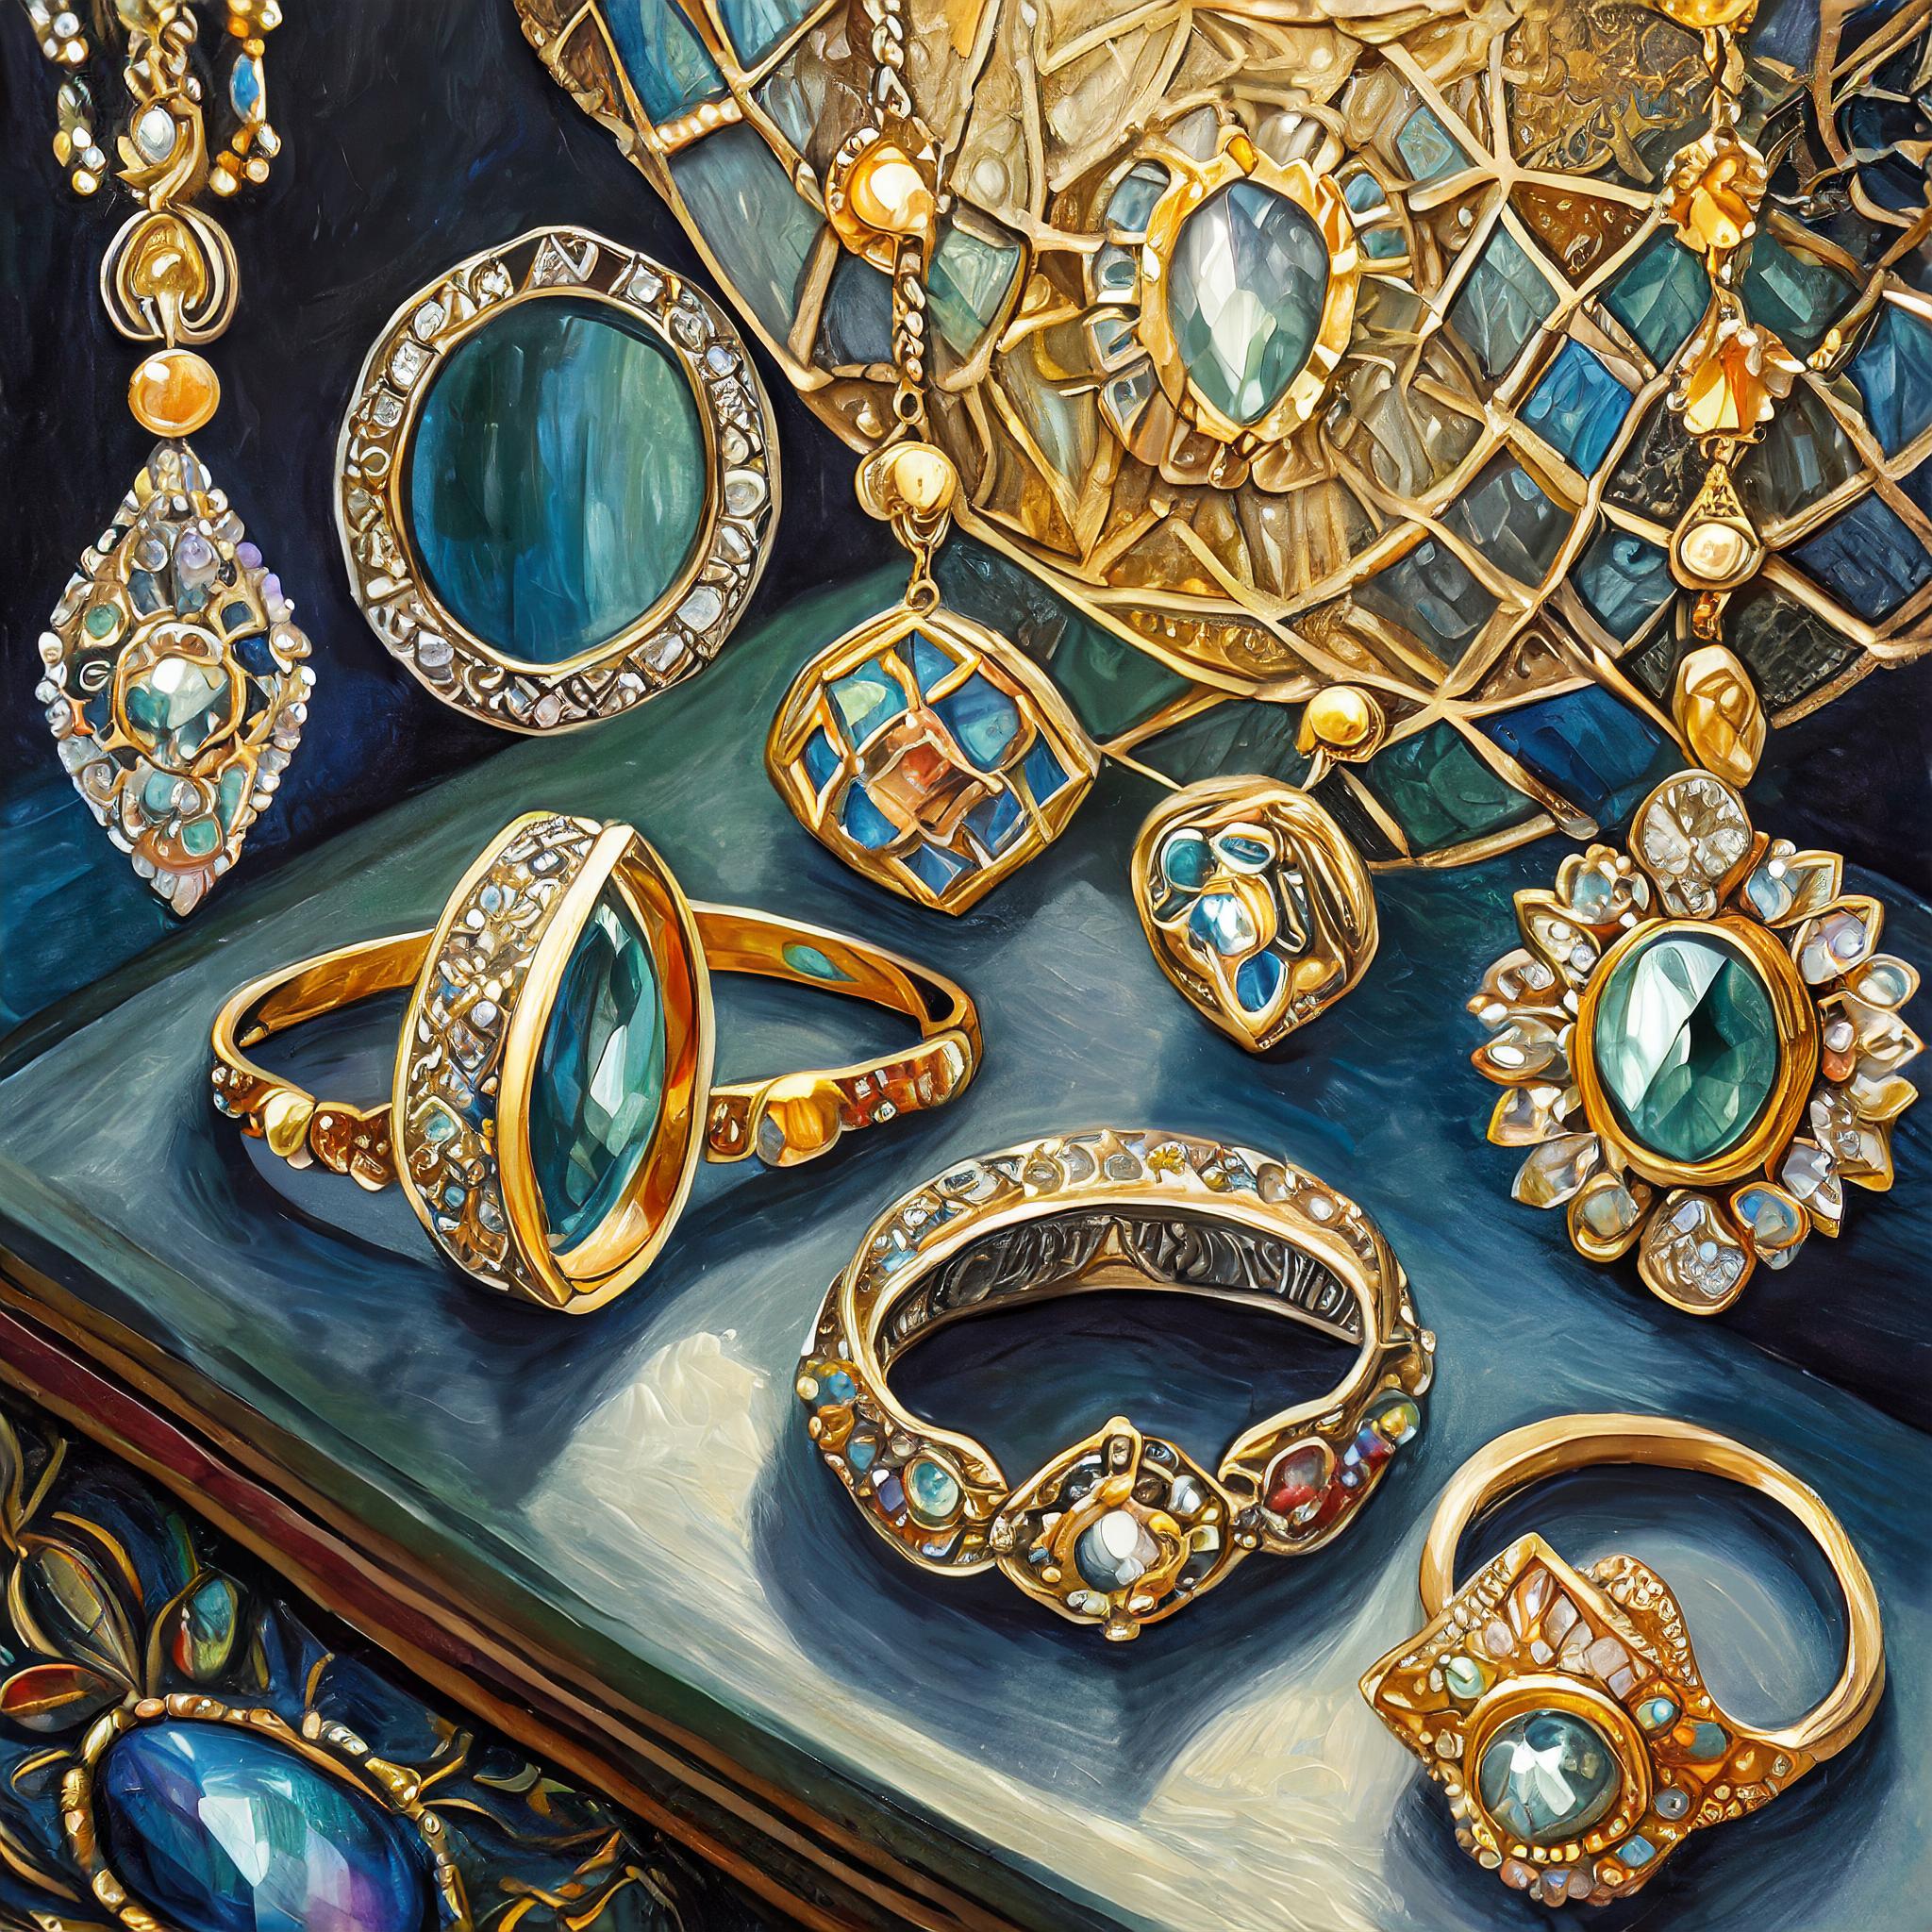 rings, necklaces, earrings in a jewelry store